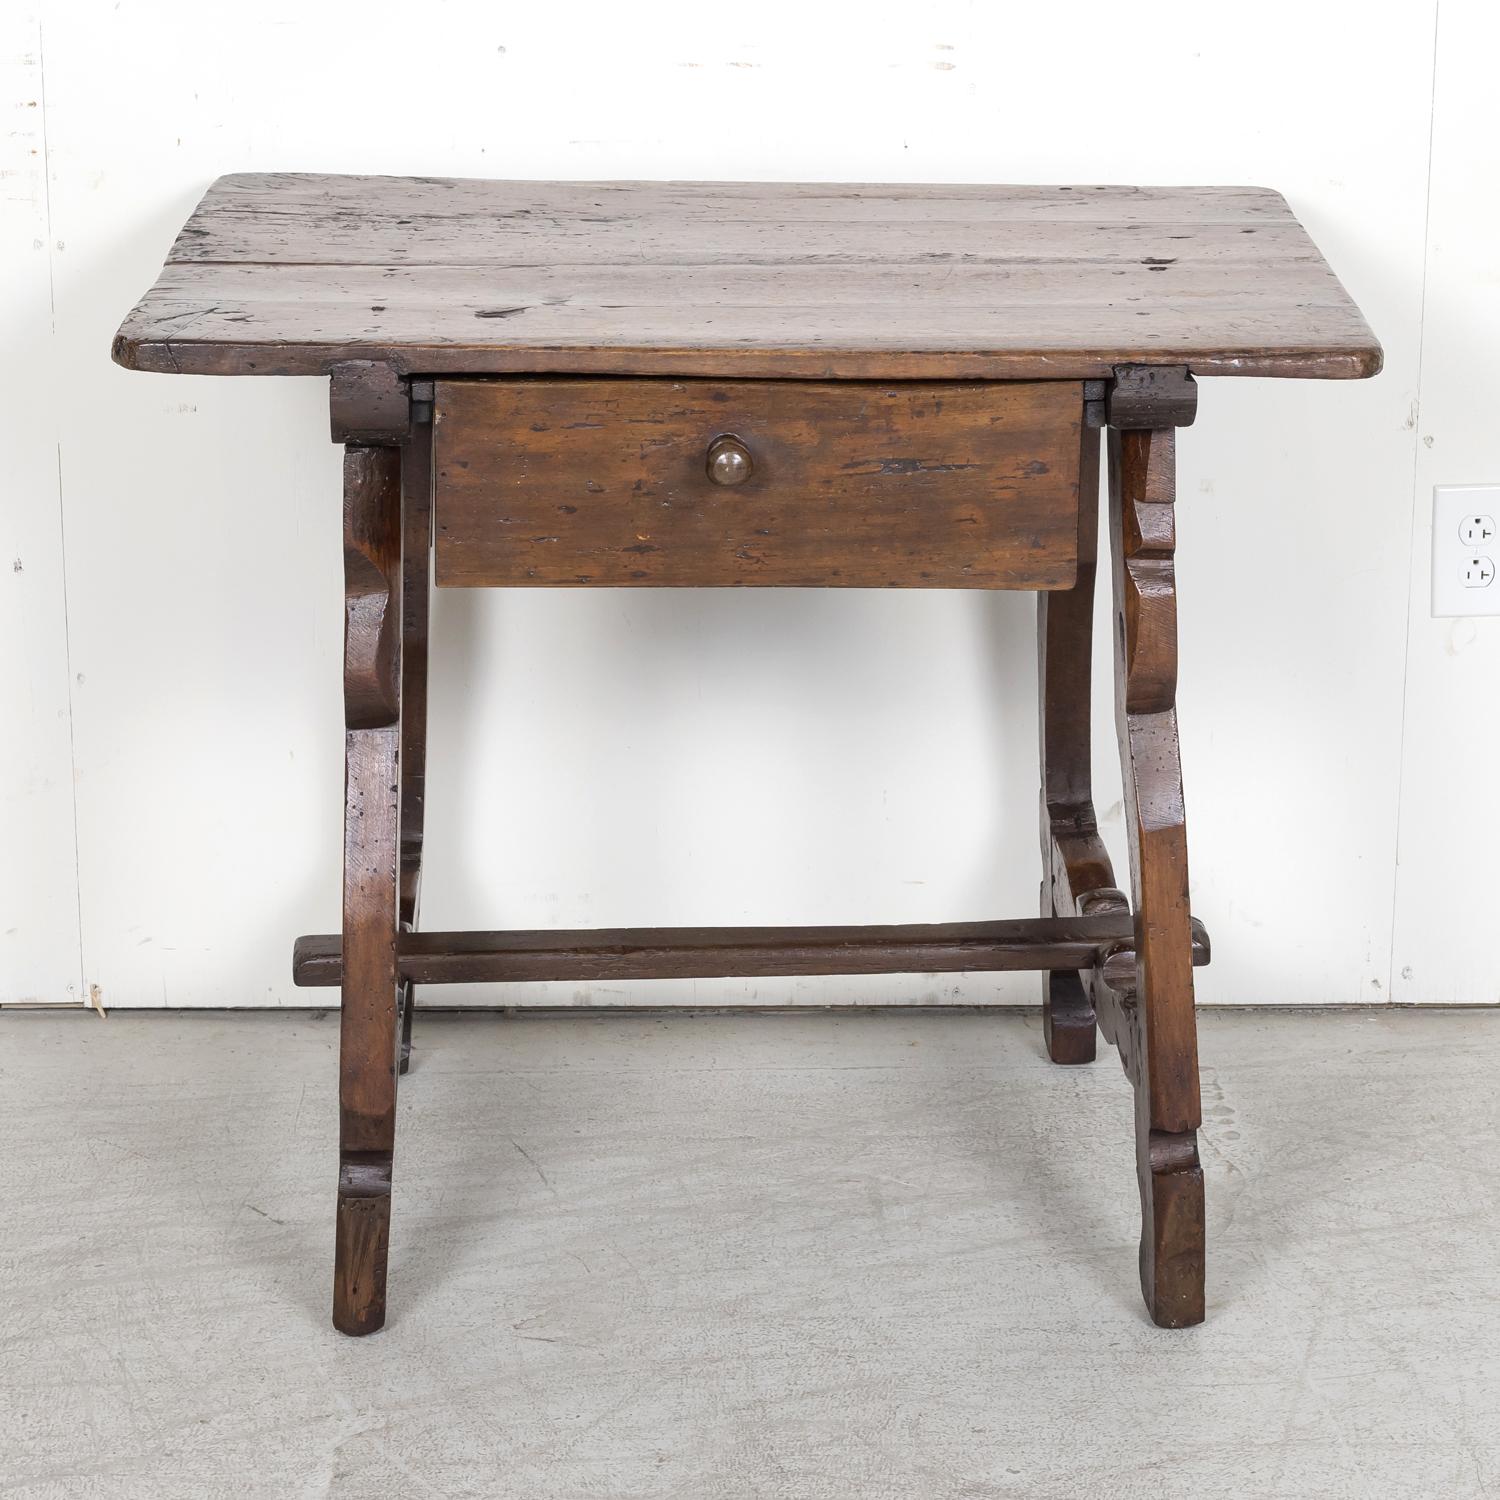 A handsome 18th century Spanish side table or desk handcrafted in the late 1700s of solid walnut in the Catalan region having a rectangular plank top above a single large drawer. Raised on hand carved lyre shaped legs joined by a carved stretcher.